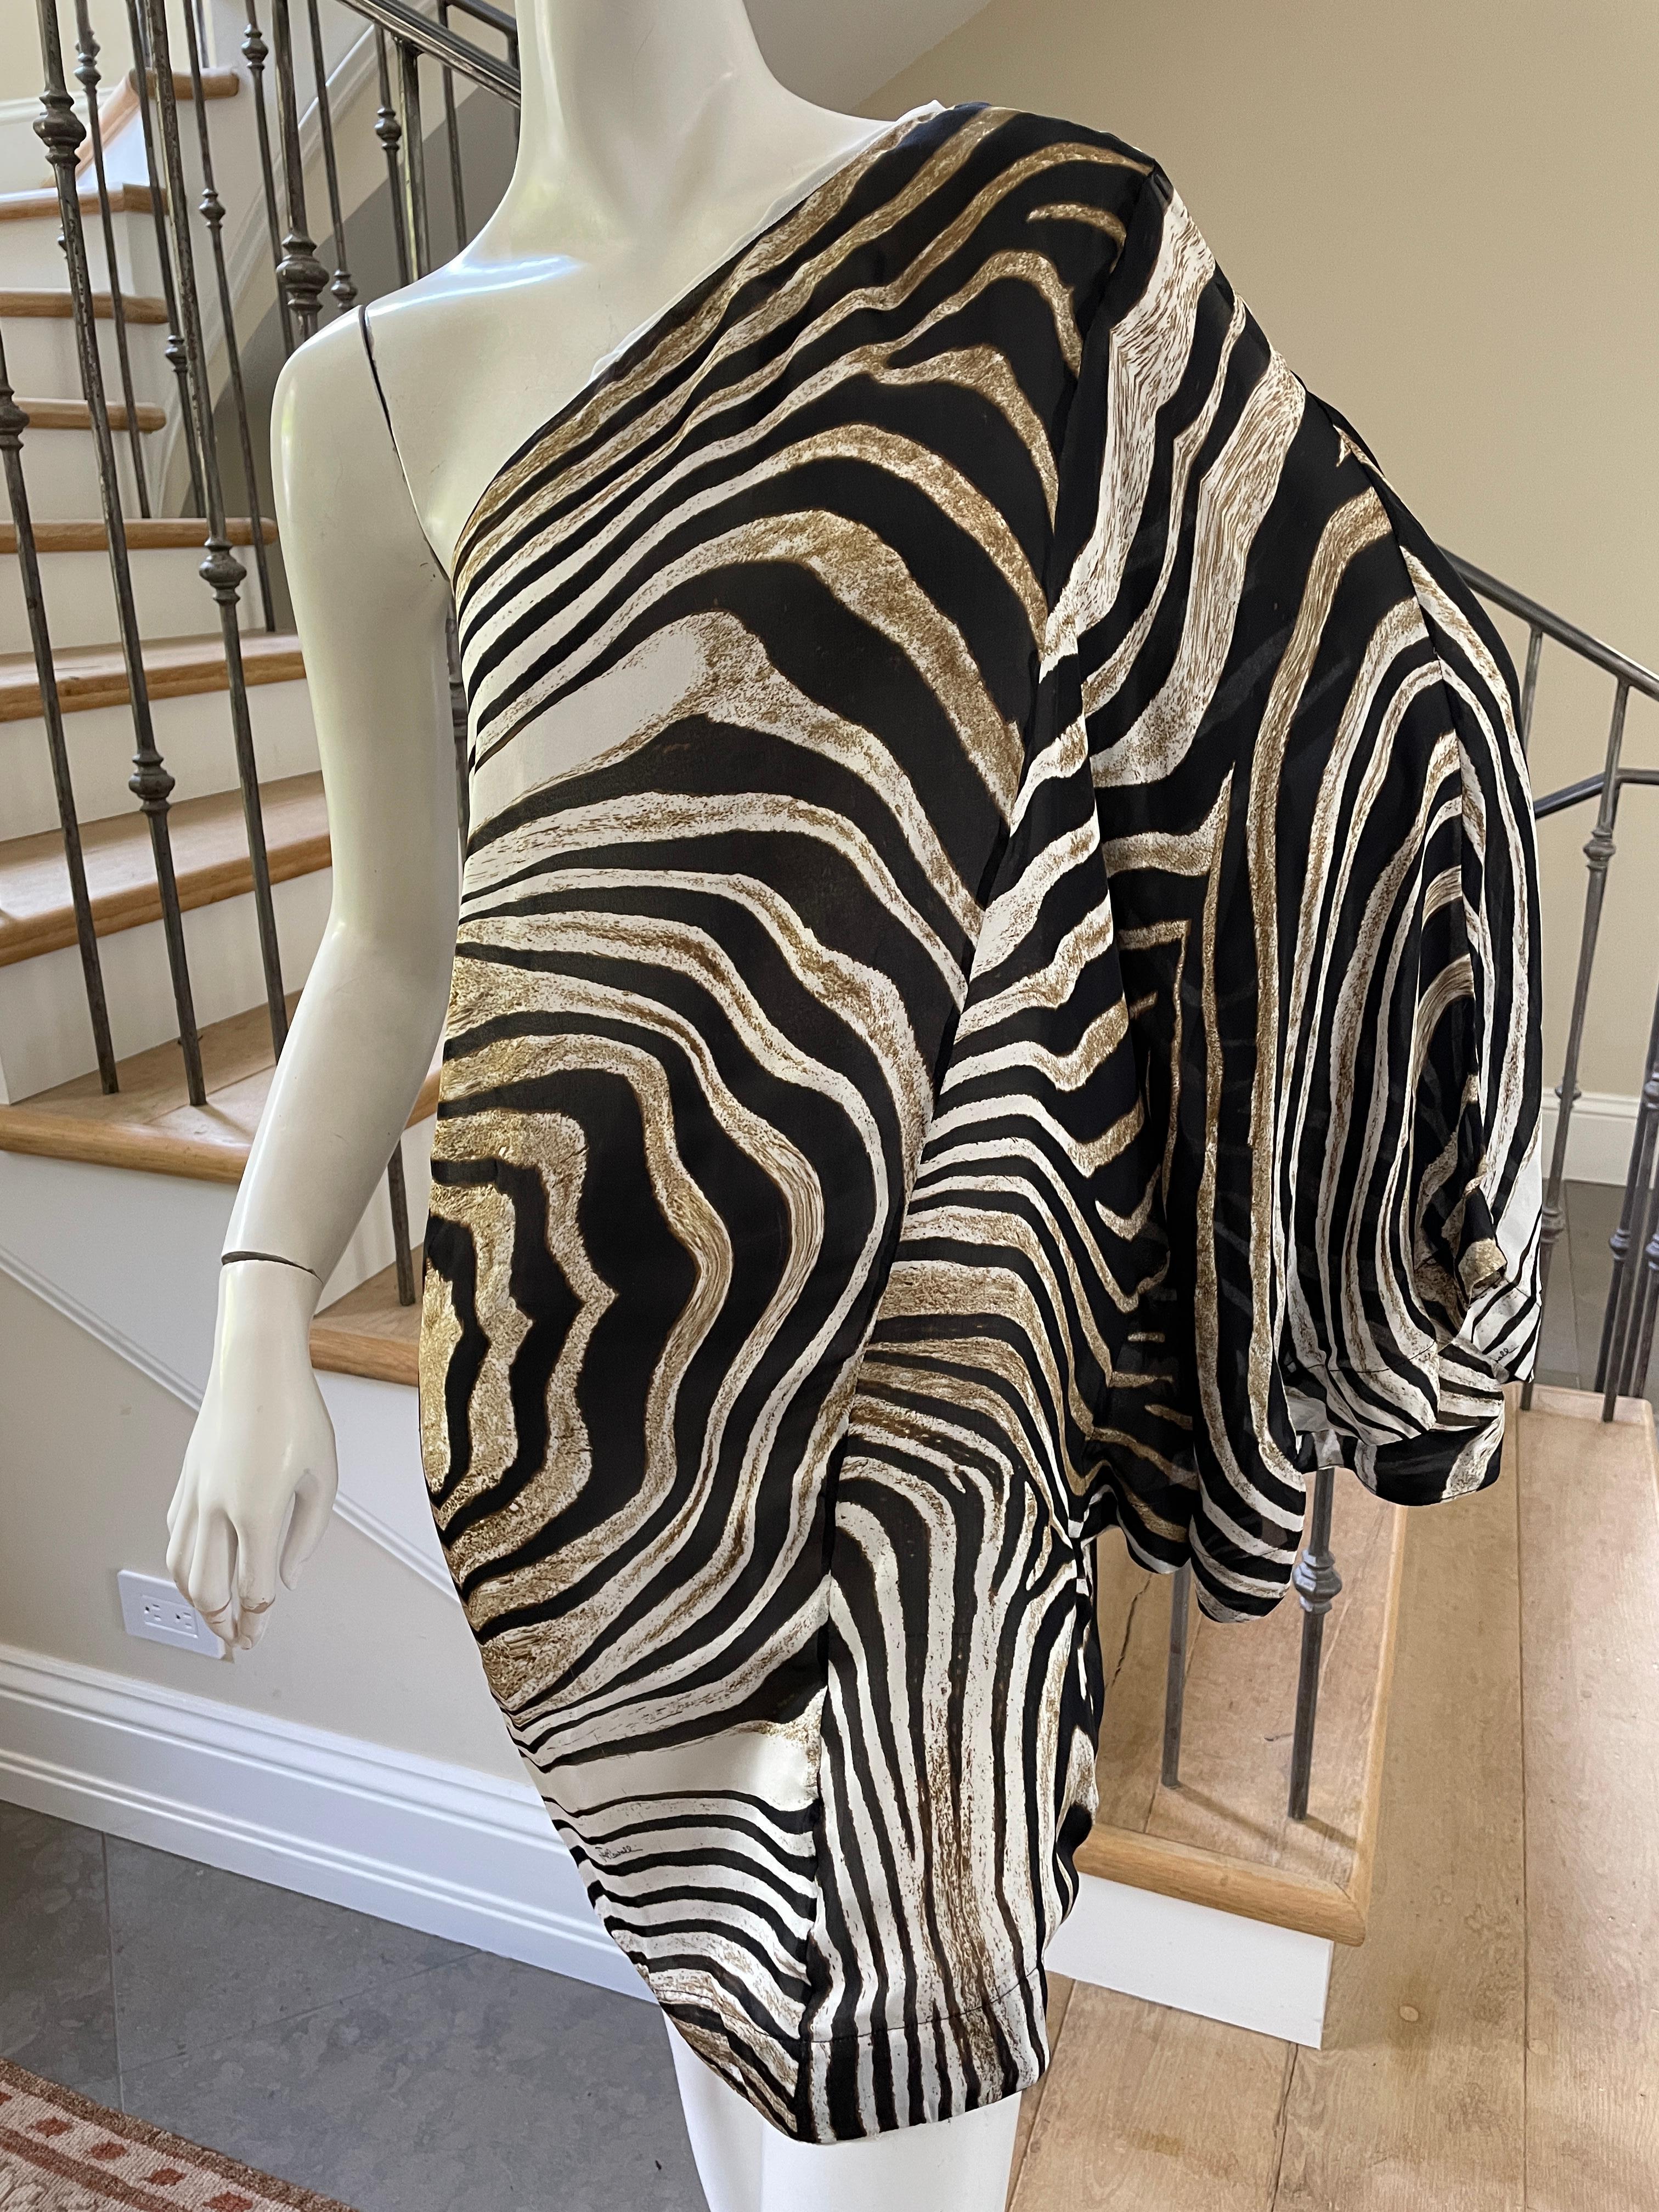 Just Cavalli Zebra Print One Sleeve Zebra Cocktail Dress by Roberto Cavalli In Excellent Condition For Sale In Cloverdale, CA